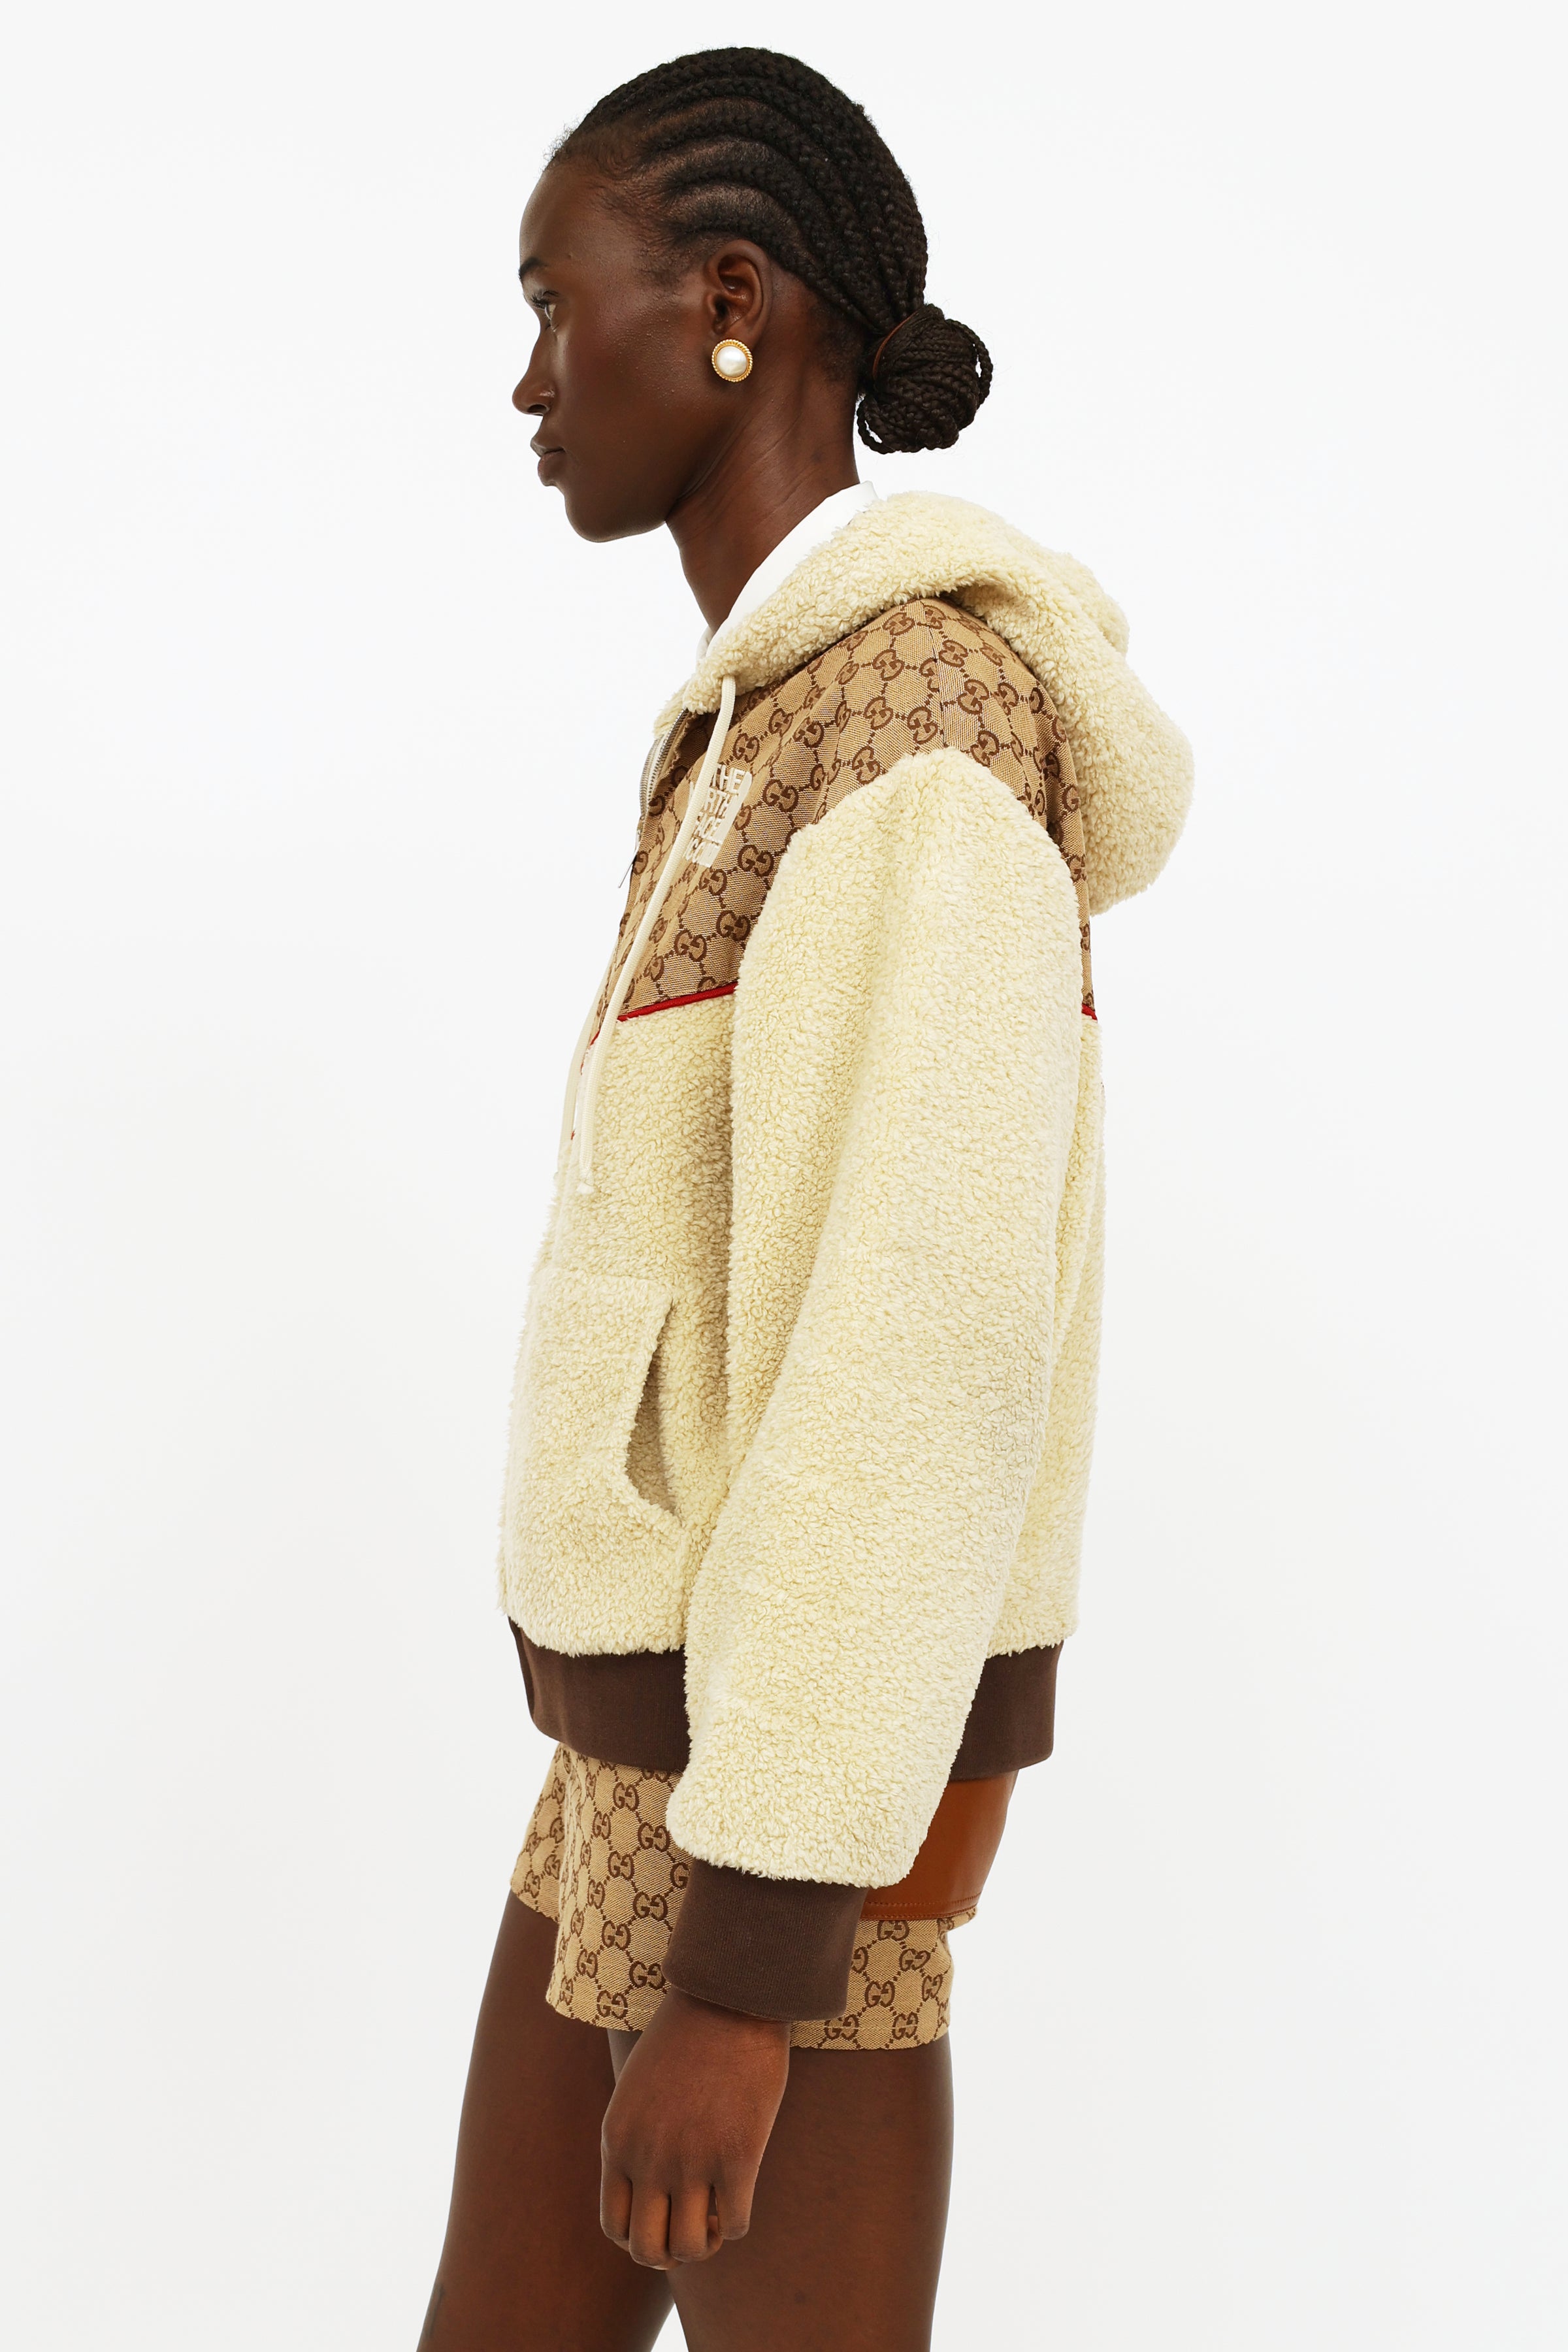 The North Face x Gucci GG Canvas Shearling Jacket 'Beige/Ebony